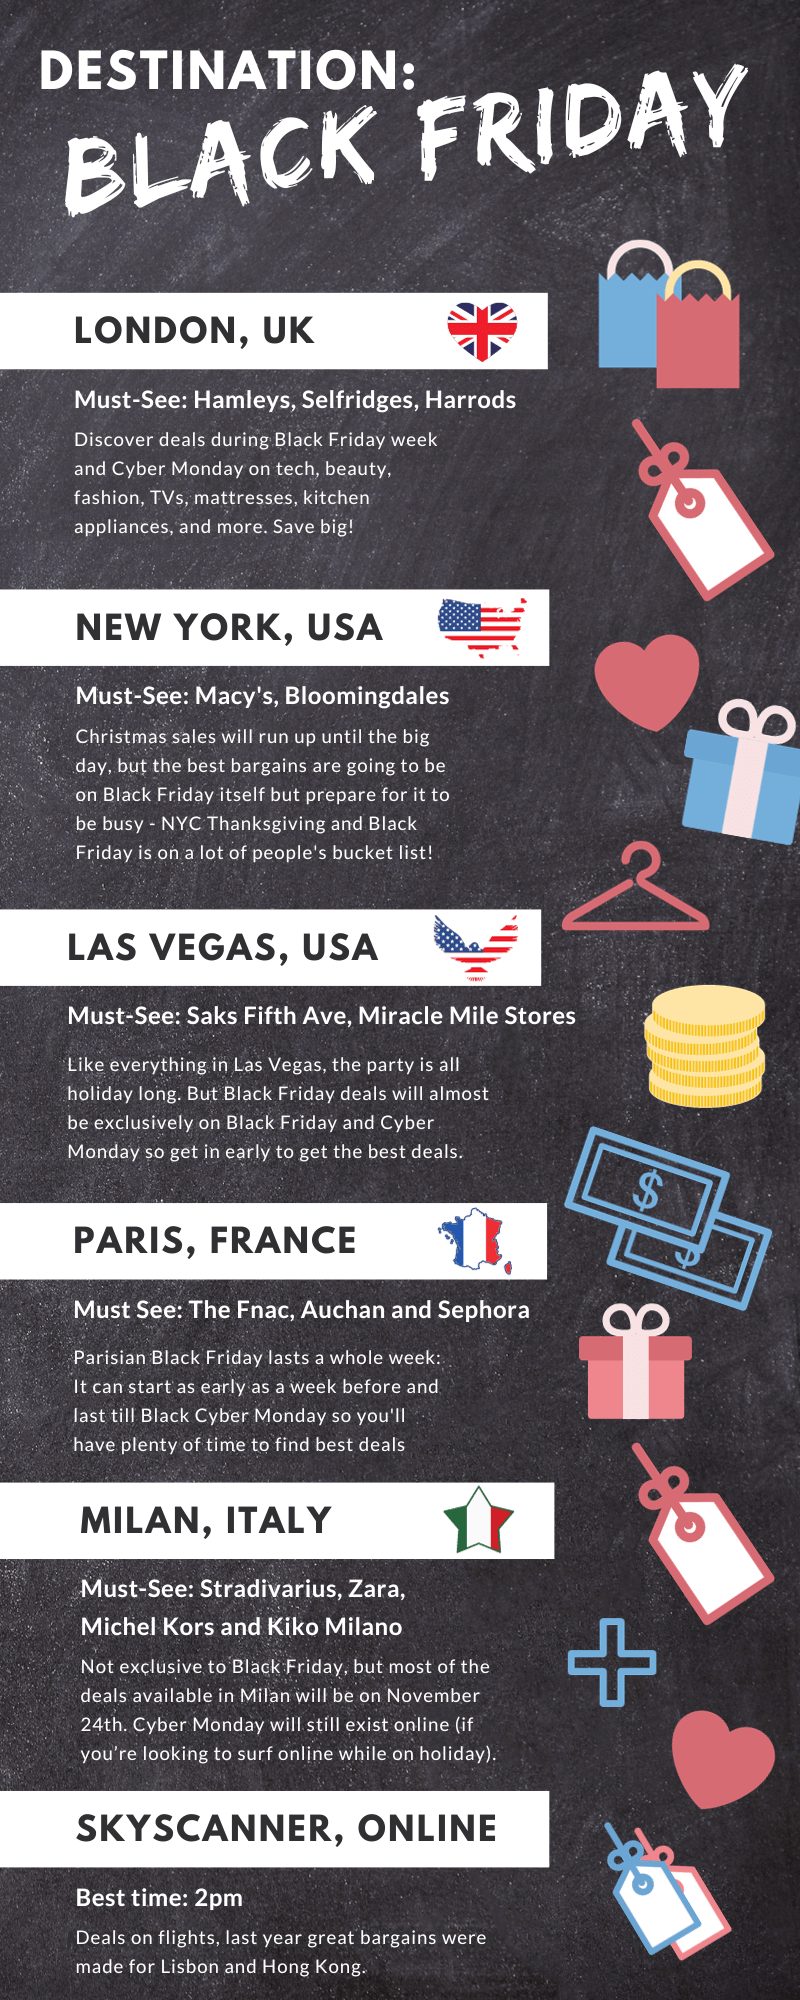 Top Destinations for Black Friday